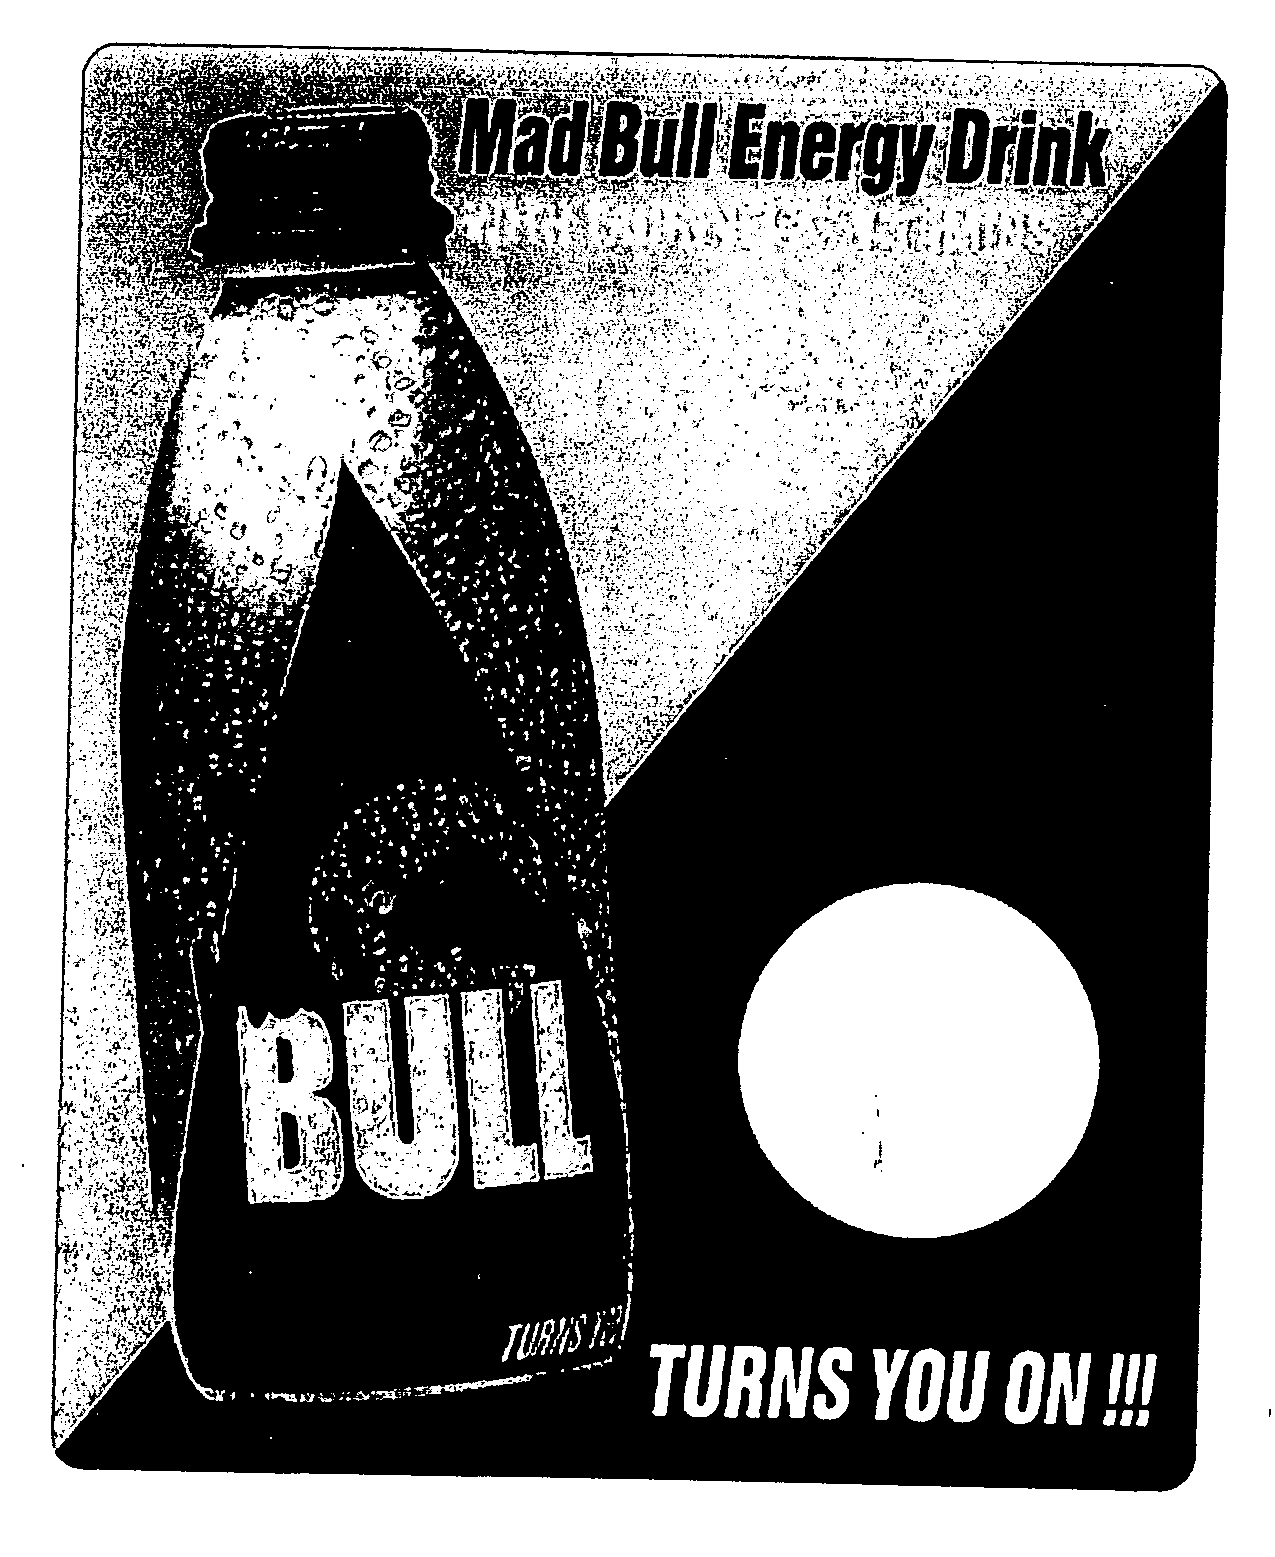  MAD BULL ENERGY DRINK TURNS YOU ON!!!